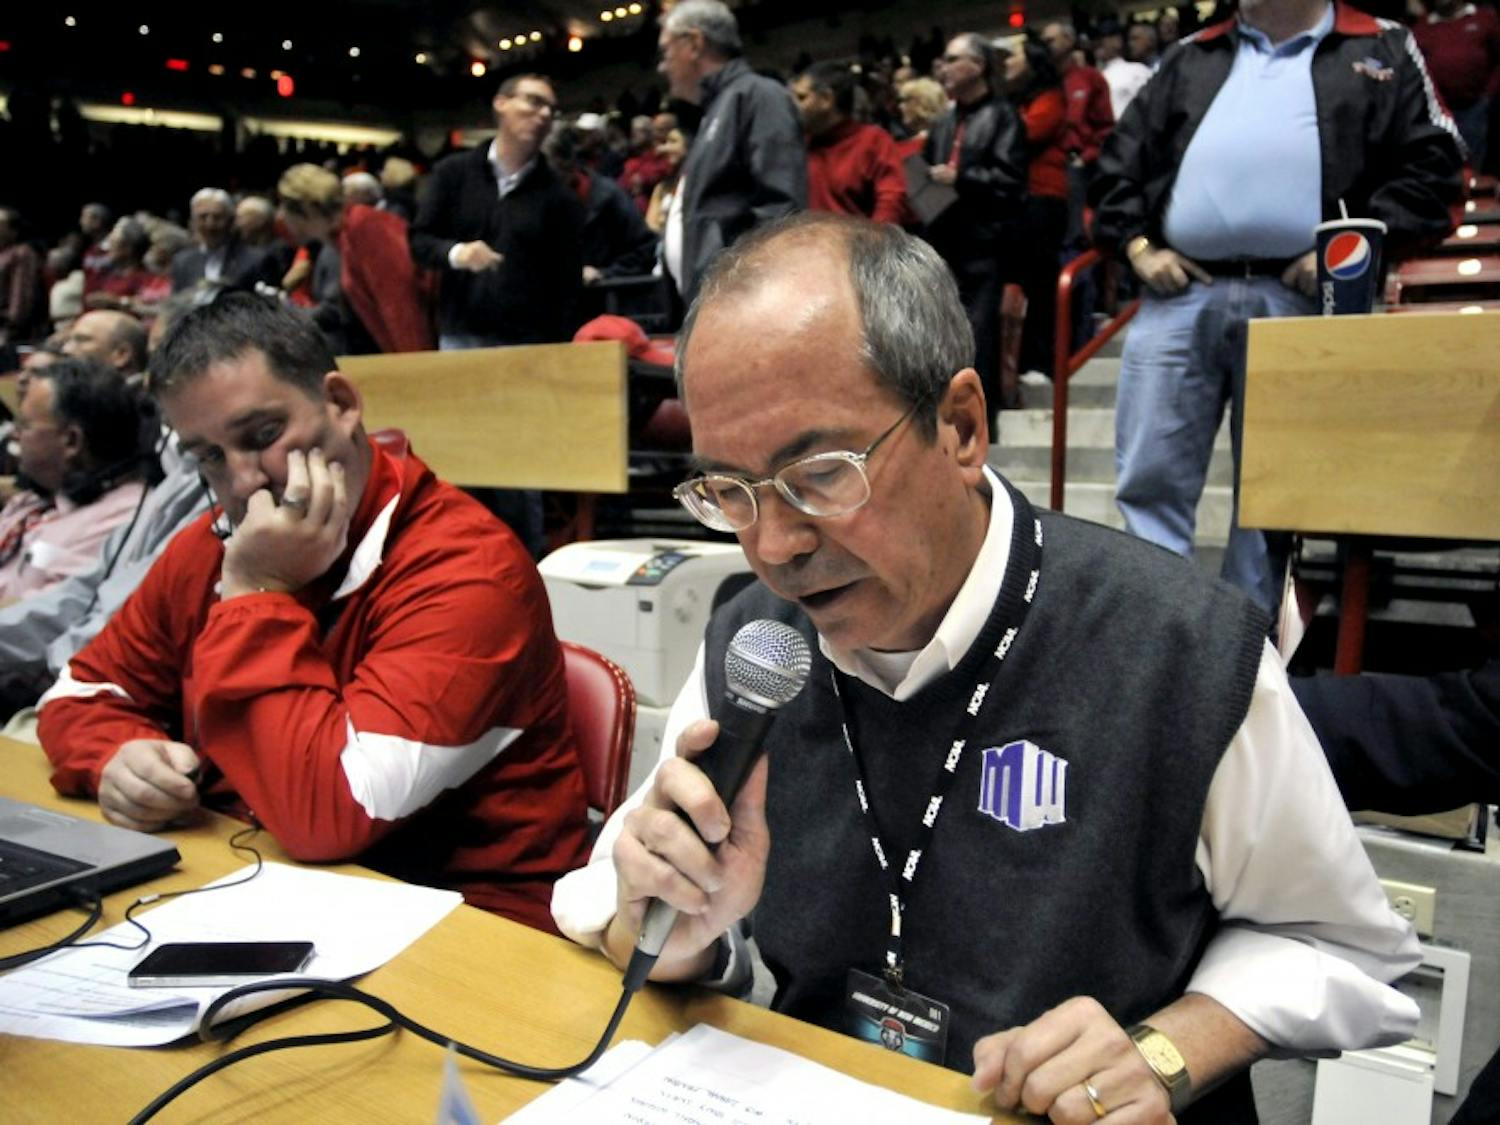 Public address announcer Stu Walker speaks at WisePies Arena in this undated photo. Walker passed away at the age of 61 after being the announcer for Lobo games for 20 years.